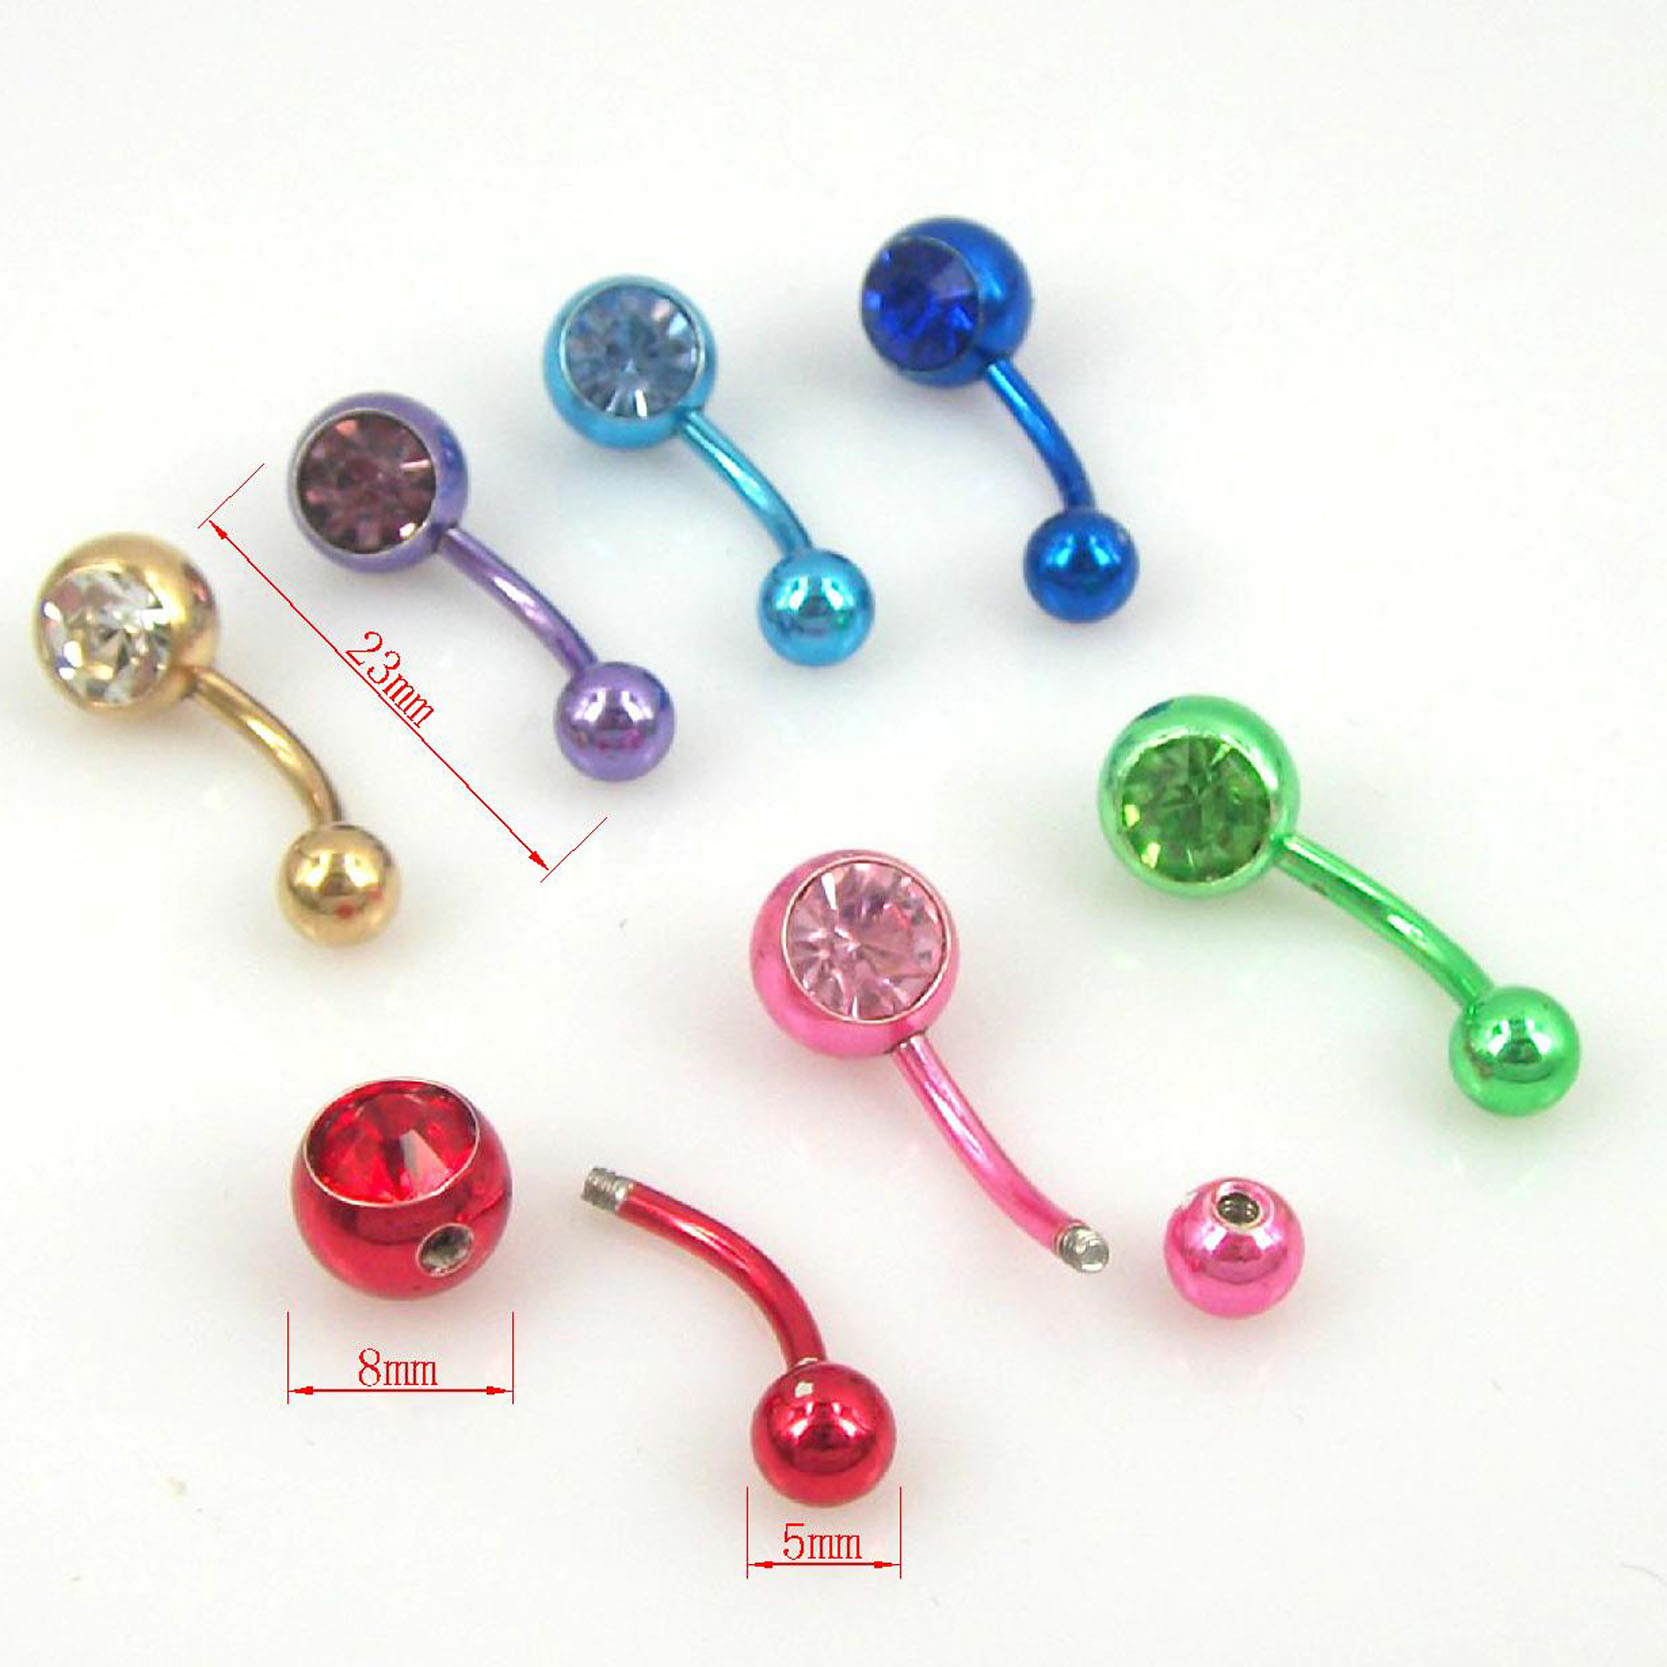 6pcs Mixed Colorful Rhinestone Ball Navel Ring Stainless Steel Barbell Piercing H6199 On Luulla 